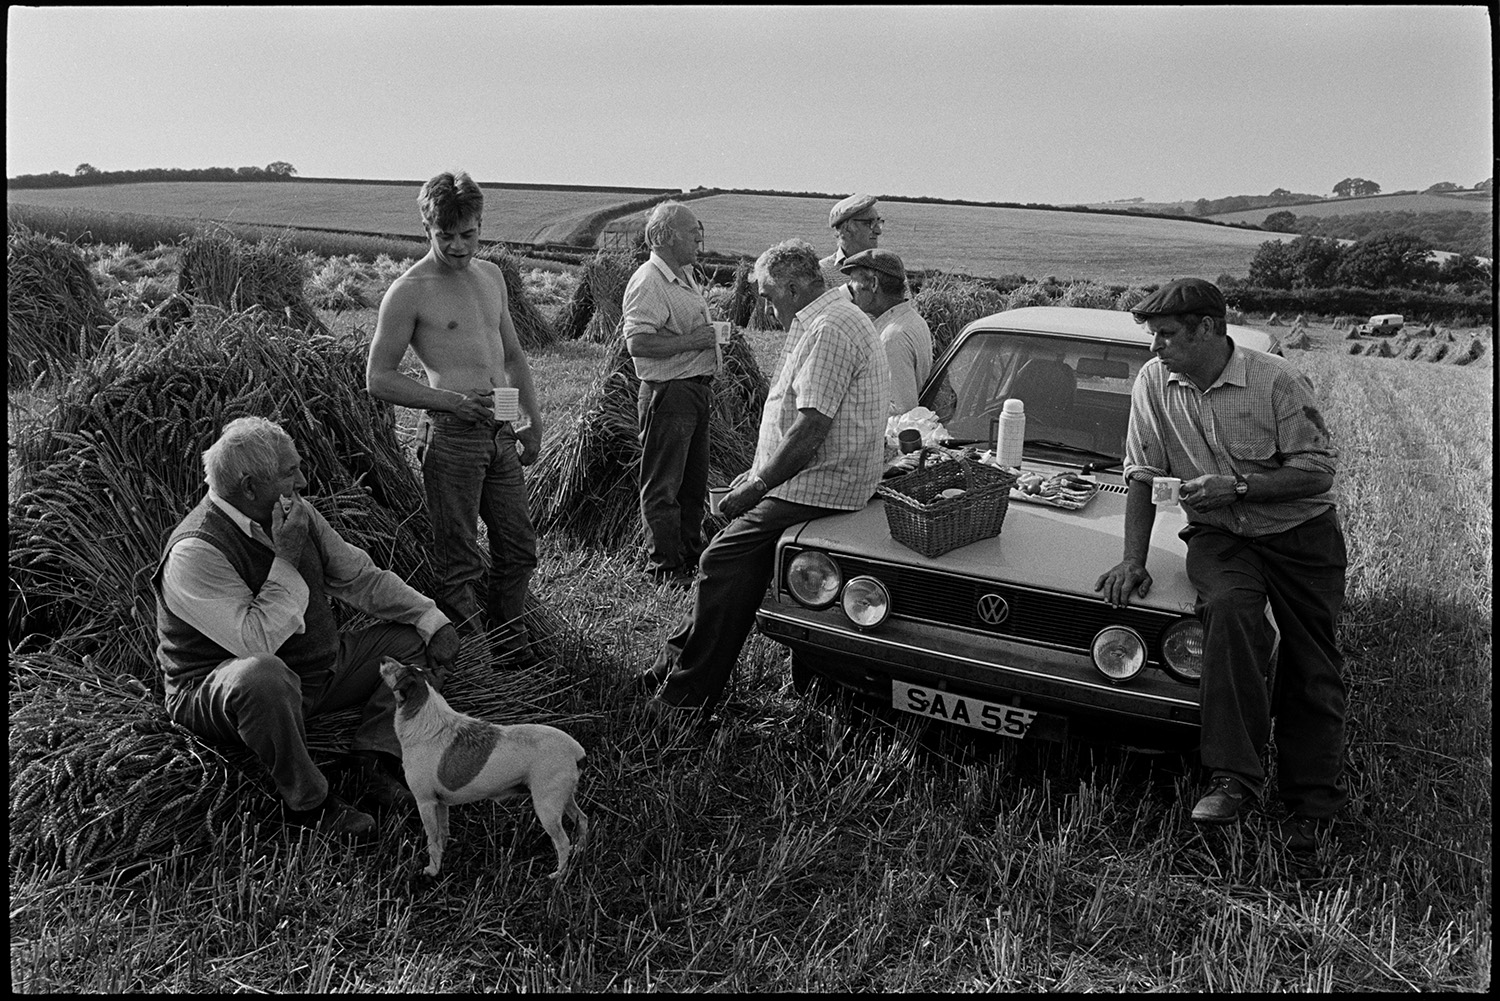 Harvesters tea break, leaning on car, woman, farmer's wife pouring from kettle, dog. 
[Seven men, possibly from the Down family, having a tea break from harvesting by a car, in a field at Spittle Farm, Chulmleigh. Cakes, a basket and thermos flask are on the bonnet of the car. A dog is with one man who is sat against a corn stook. Other corn stooks can be seen in the background.]